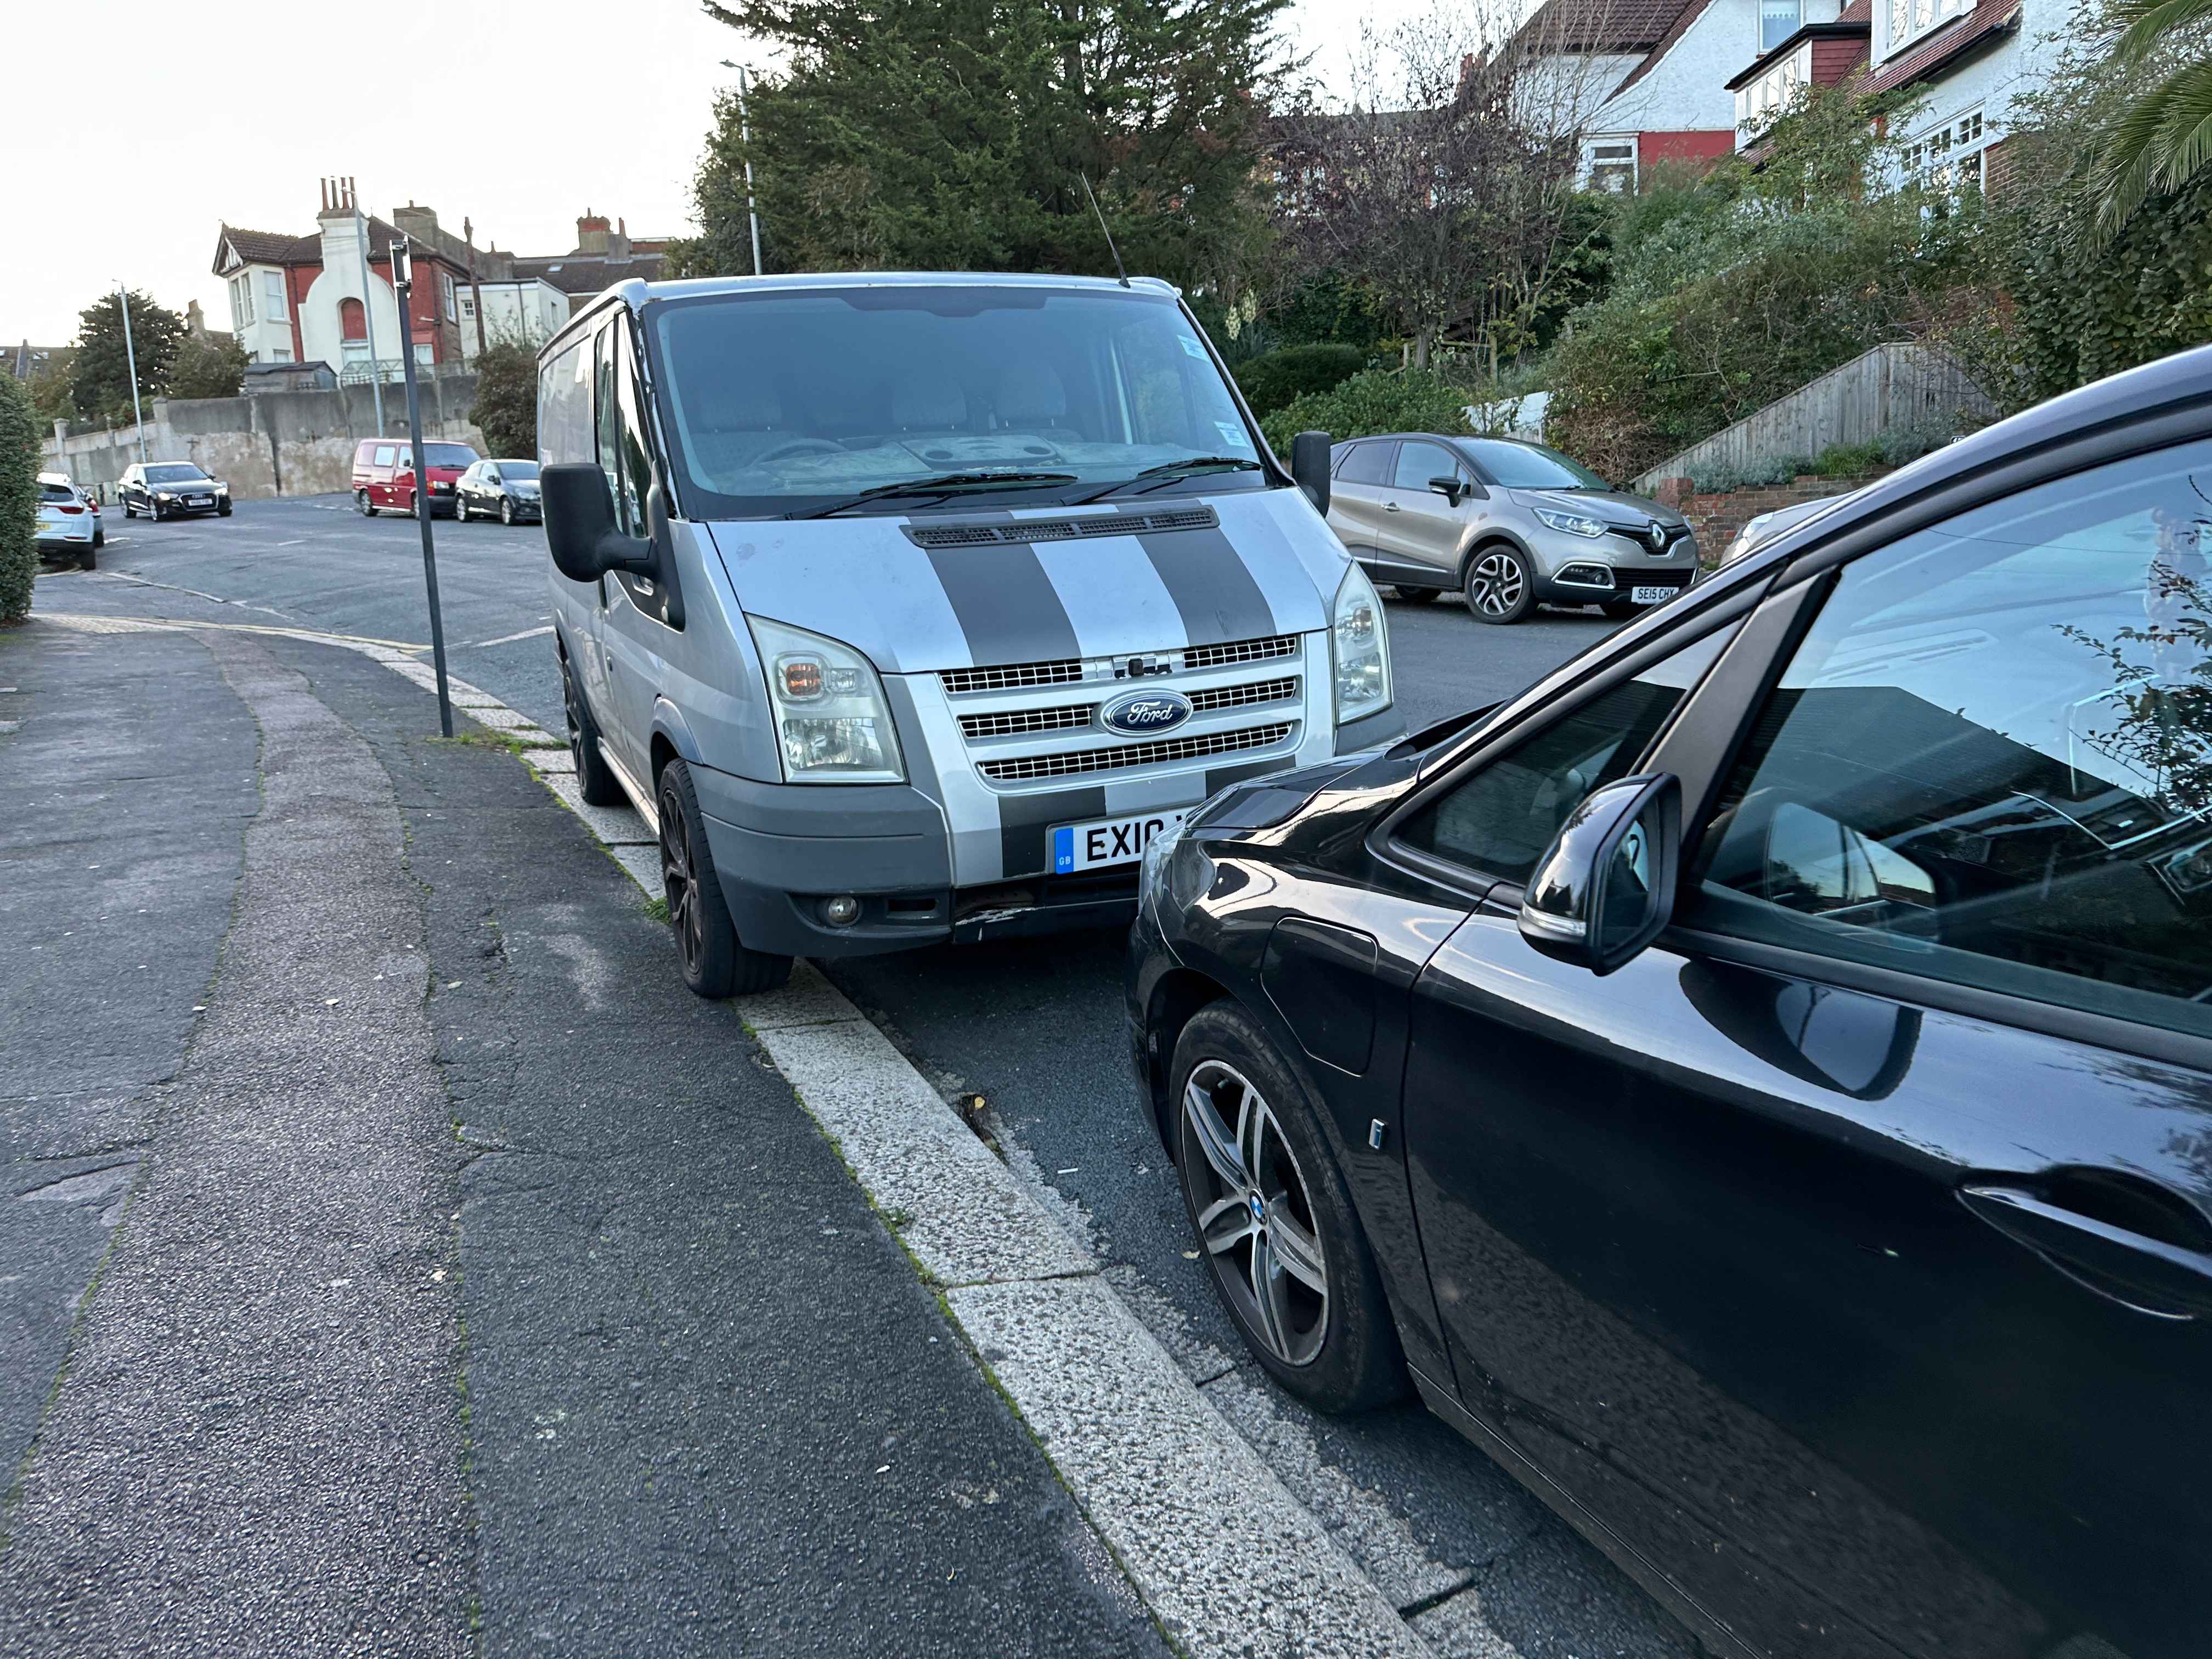 Photograph of EX10 VRU - a Silver Ford Transit parked in Hollingdean by a non-resident. The fifth of ten photographs supplied by the residents of Hollingdean.